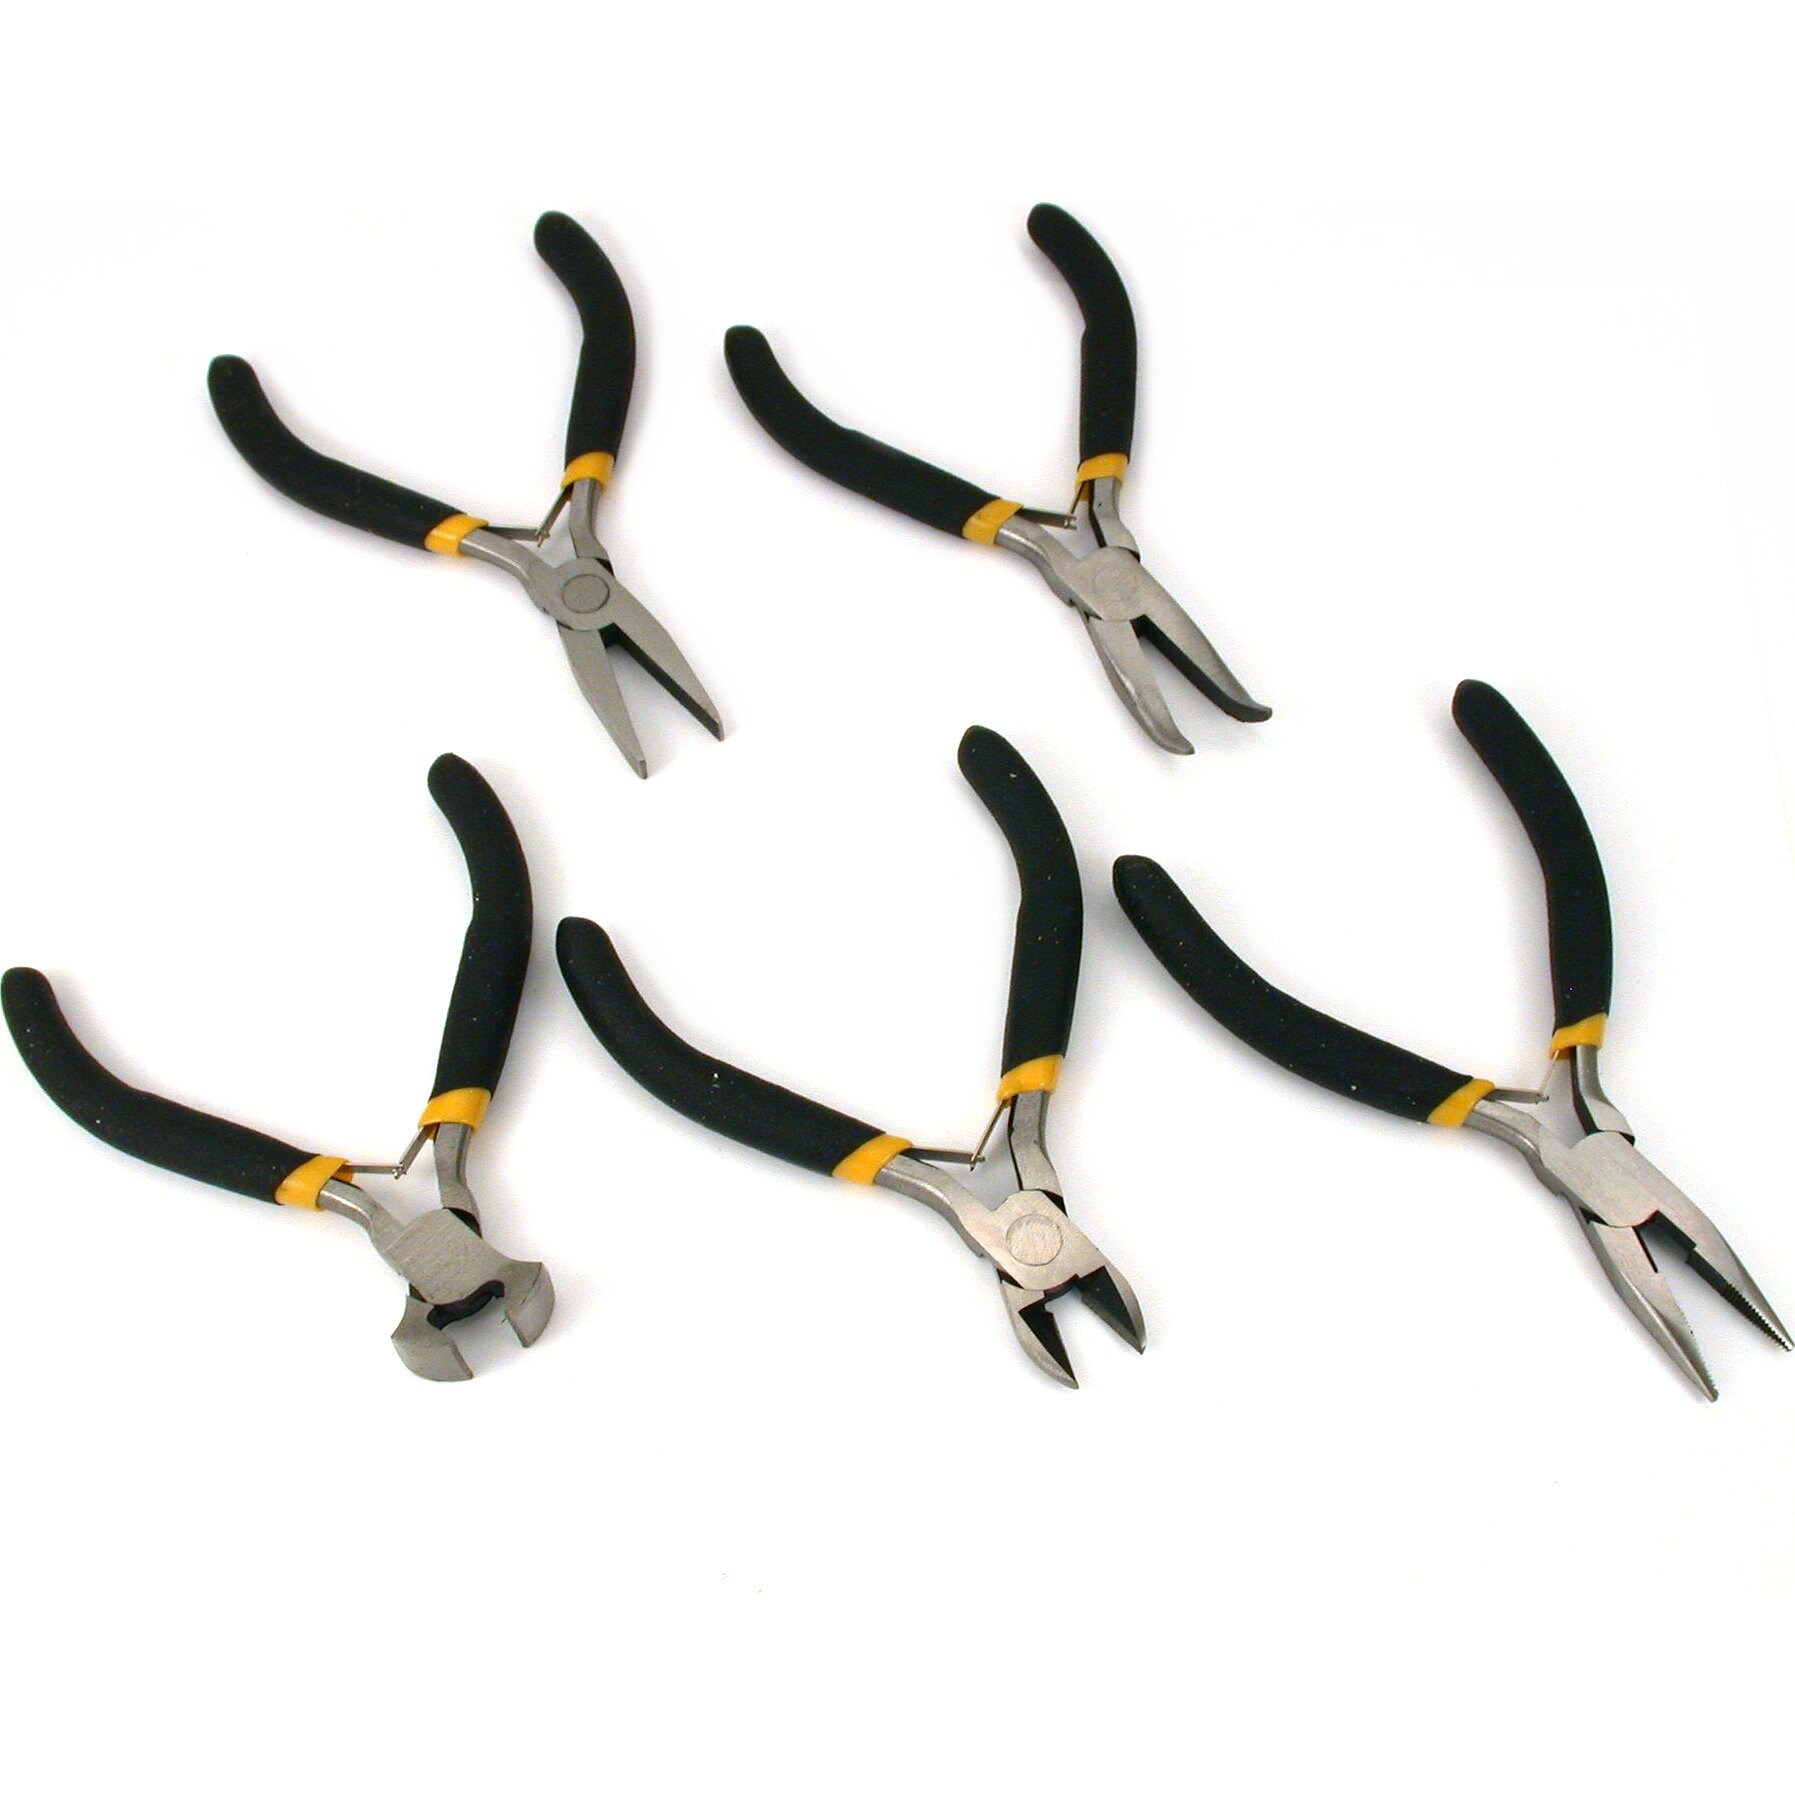 WORKPRO 5 Pieces Jewelry Pliers, Jewelry Tools Includes 6 IN 1 Wire Loop  Pliers, Nylon Nose Pliers, Bent Nose Pliers for Jewelry Making, Pointed  Tweezers, Curved Tweezers, with Storage Bag 